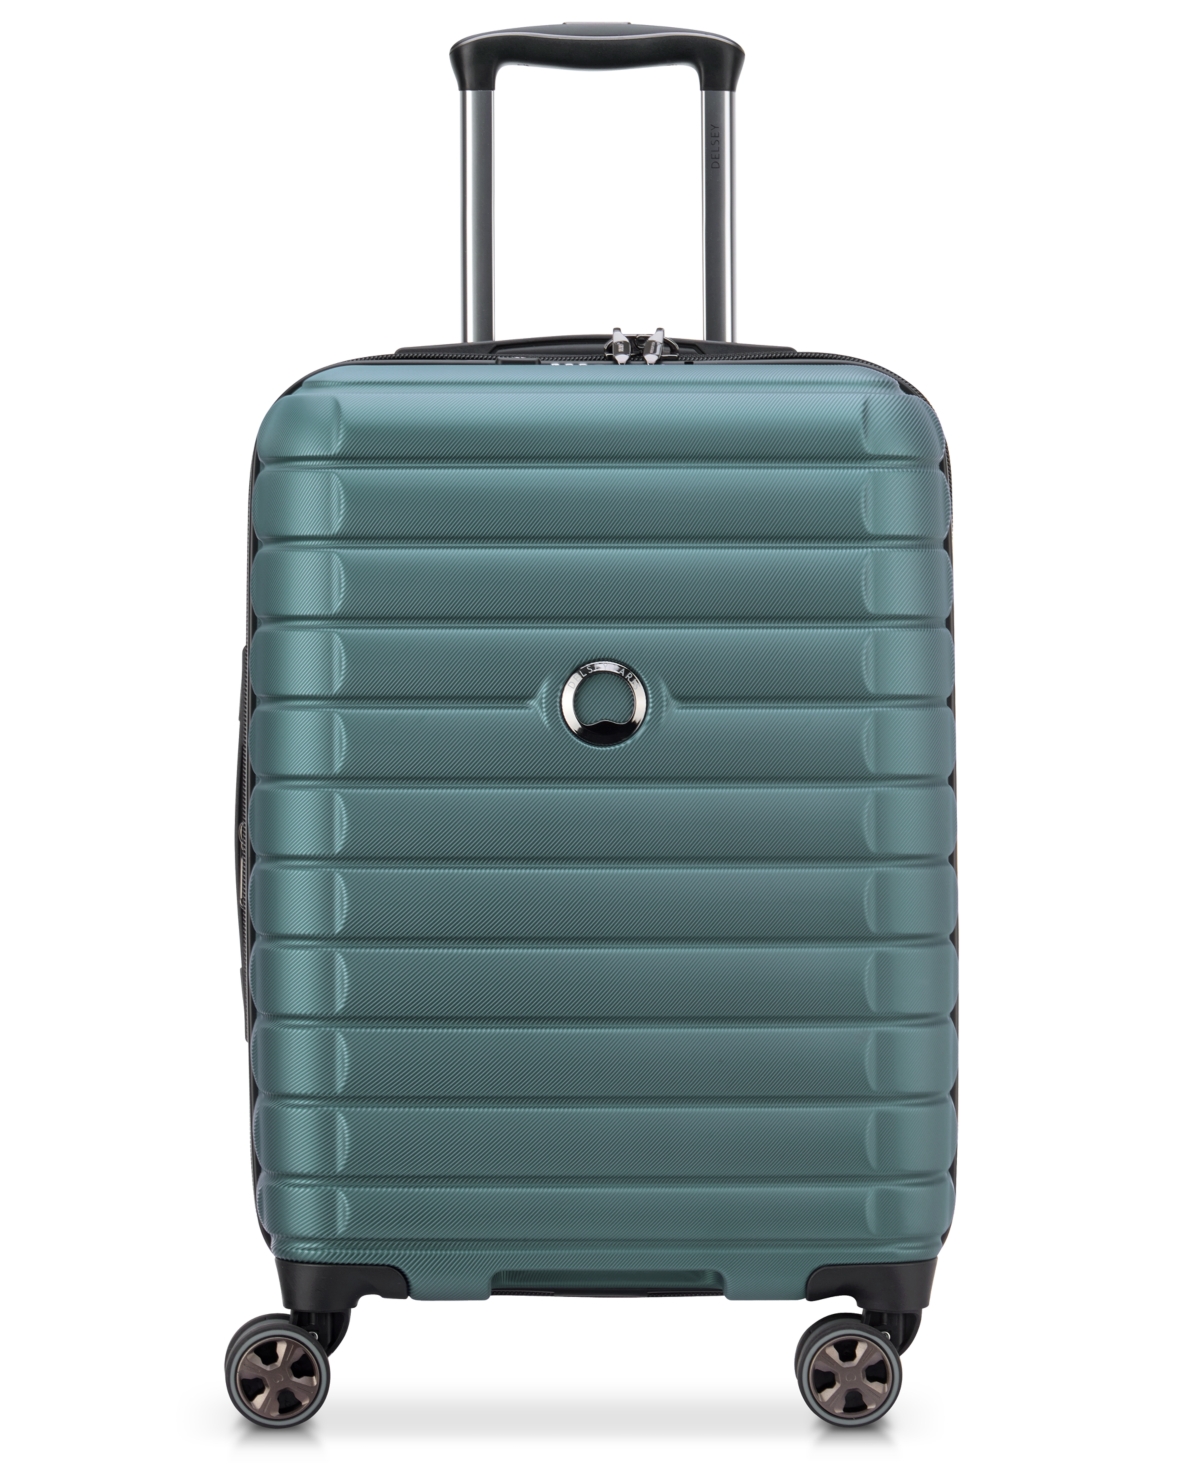 Shadow 5.0 21" Hardside Carry-on Spinner